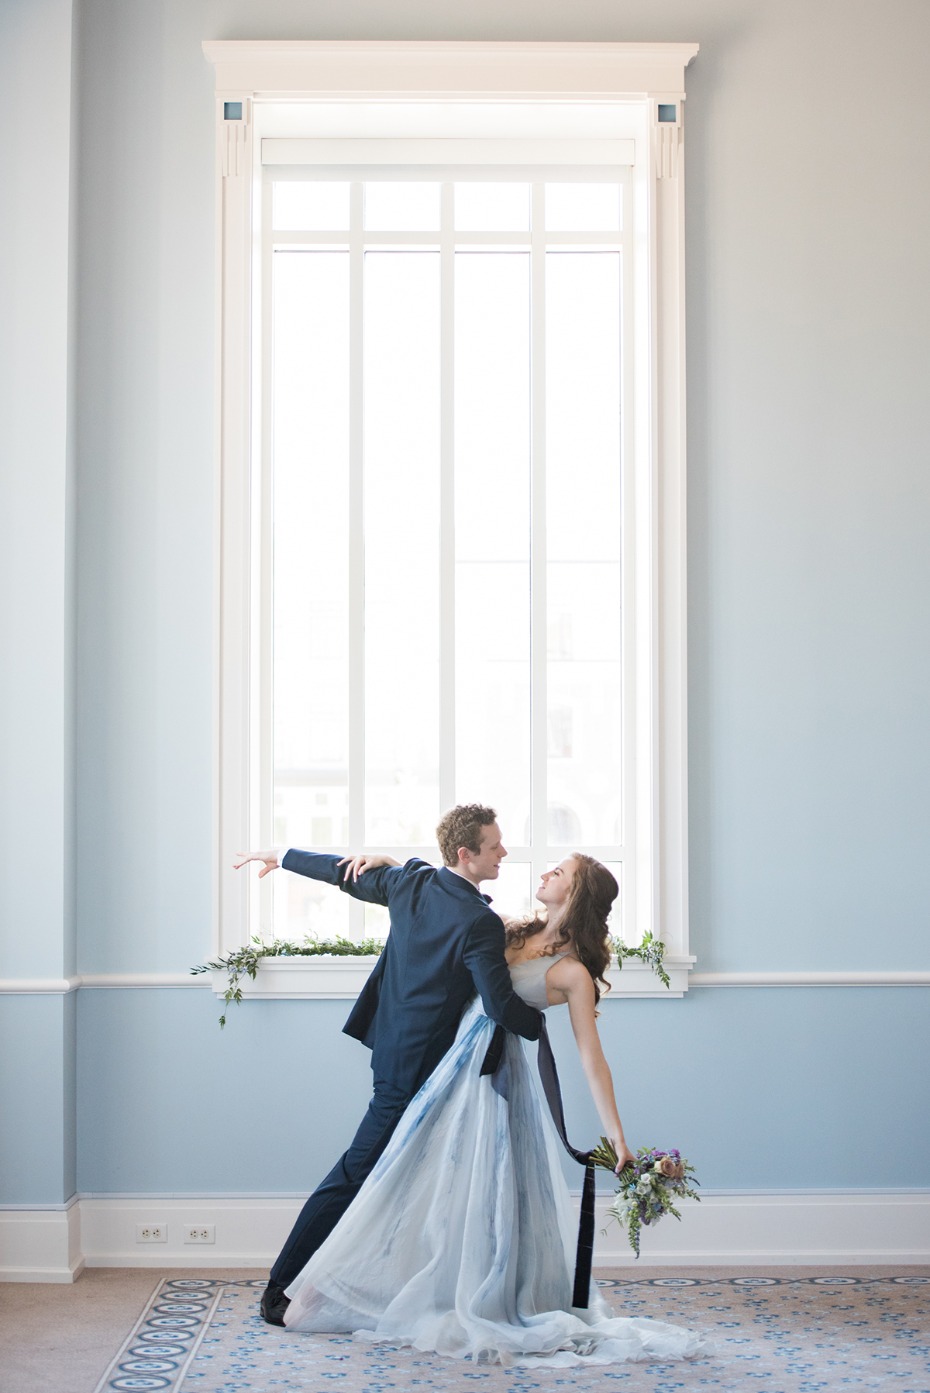 How To have ballet dancer inspired engagement shoot